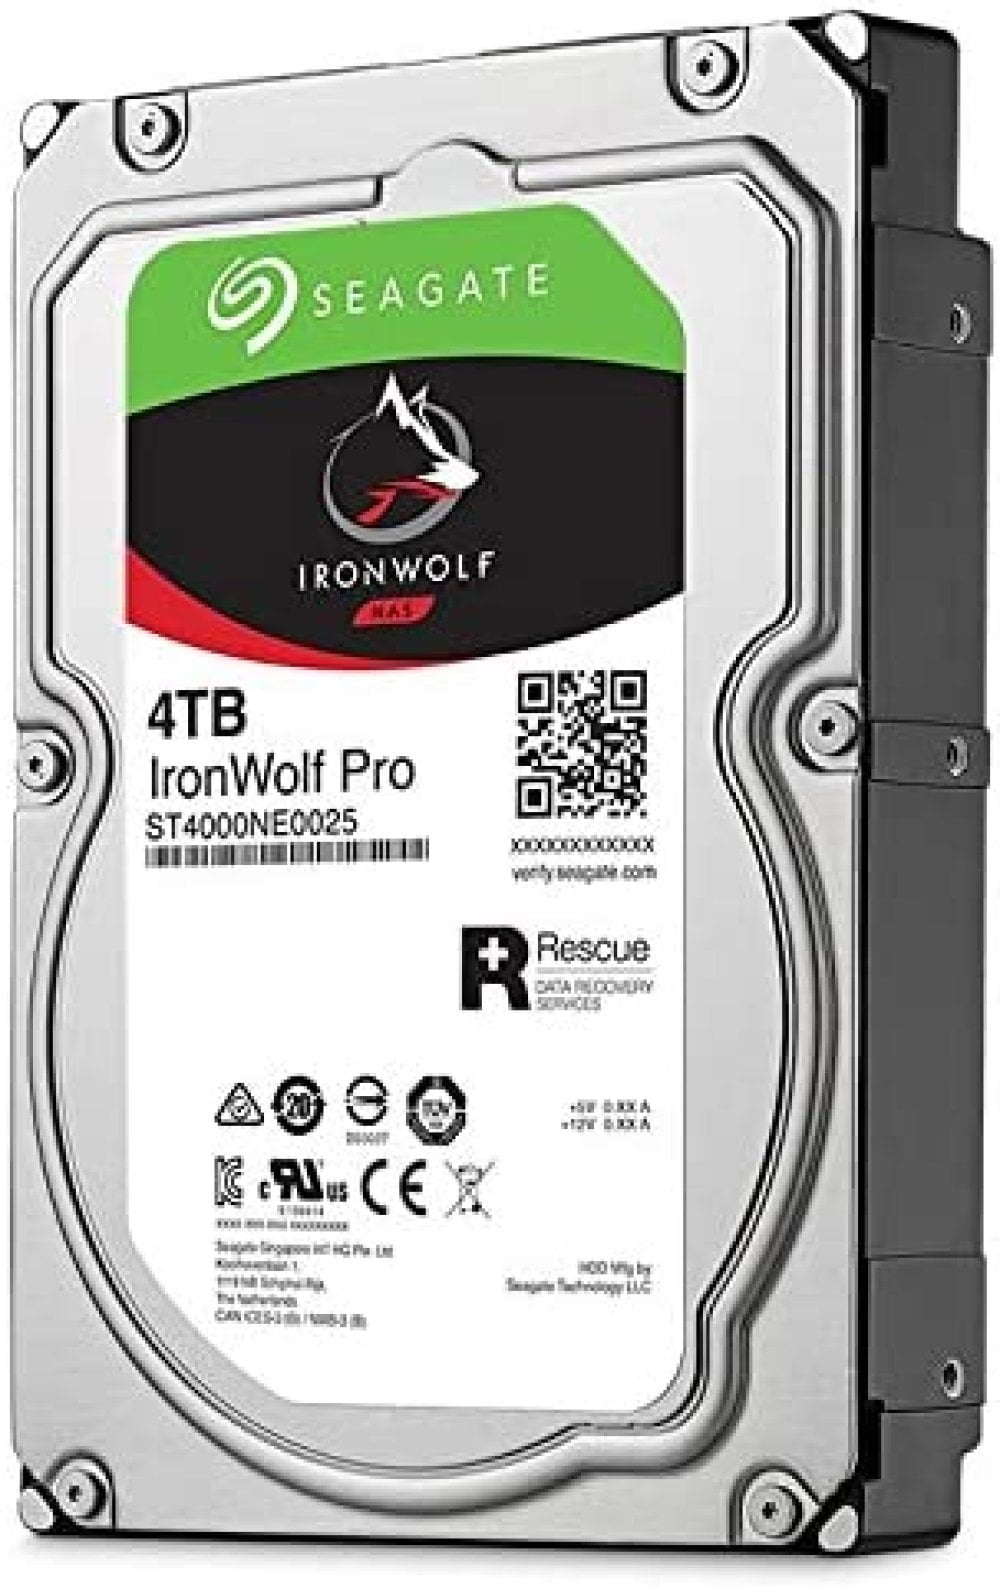 Seagate IronWolf Pro 4TB NAS Internal Hard Drive HDD – CMR 3.5 Inch SATA  6Gb/s 7200 RPM 128MB Cache for RAID Network Attached Storage, Data Recovery